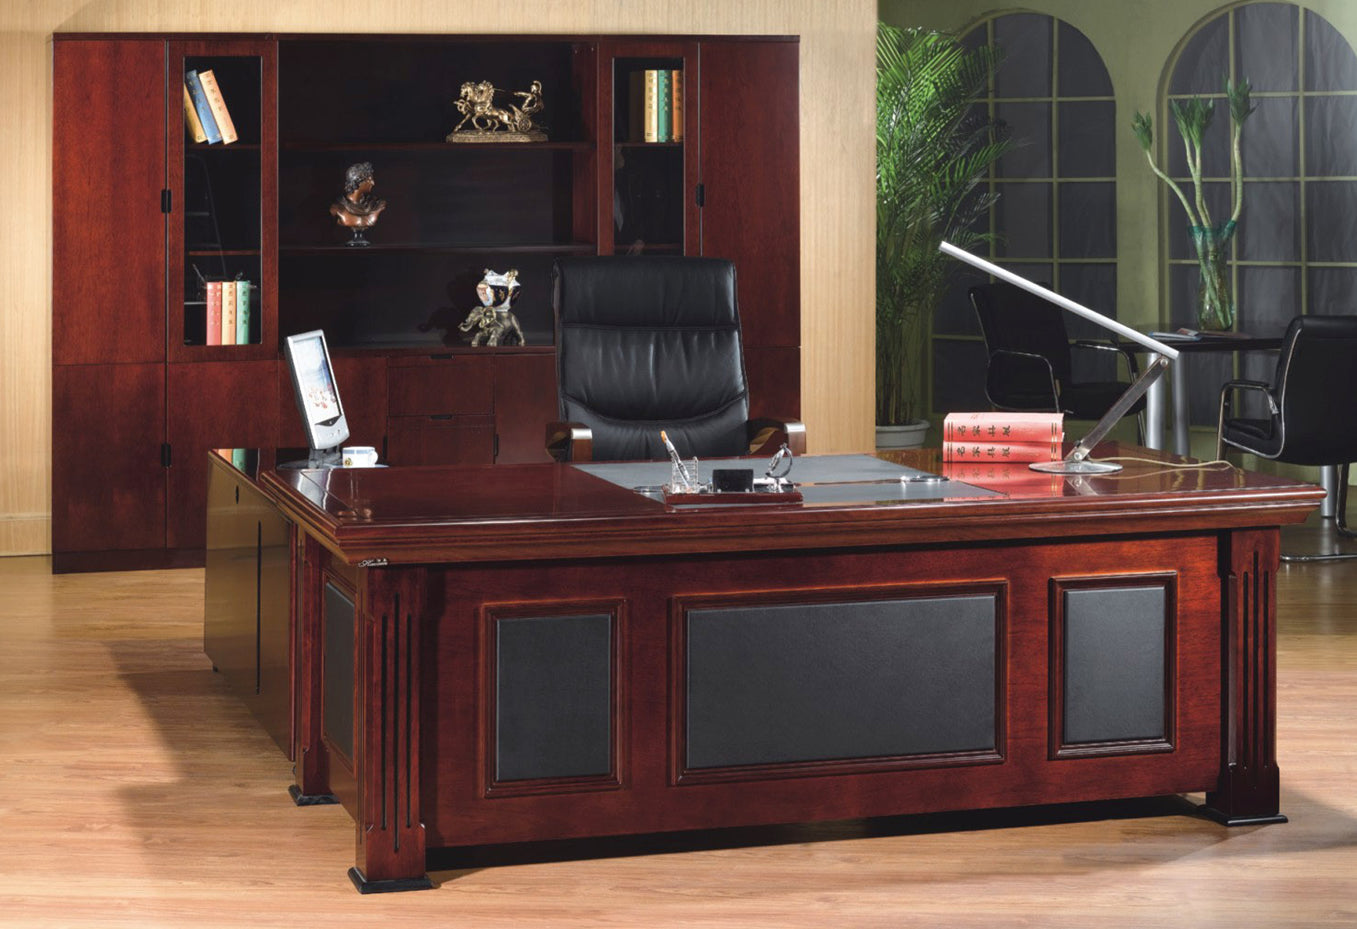 Mahogany Executive Desk With Leather Detailing - With Pedestal and Return - 2233 UK